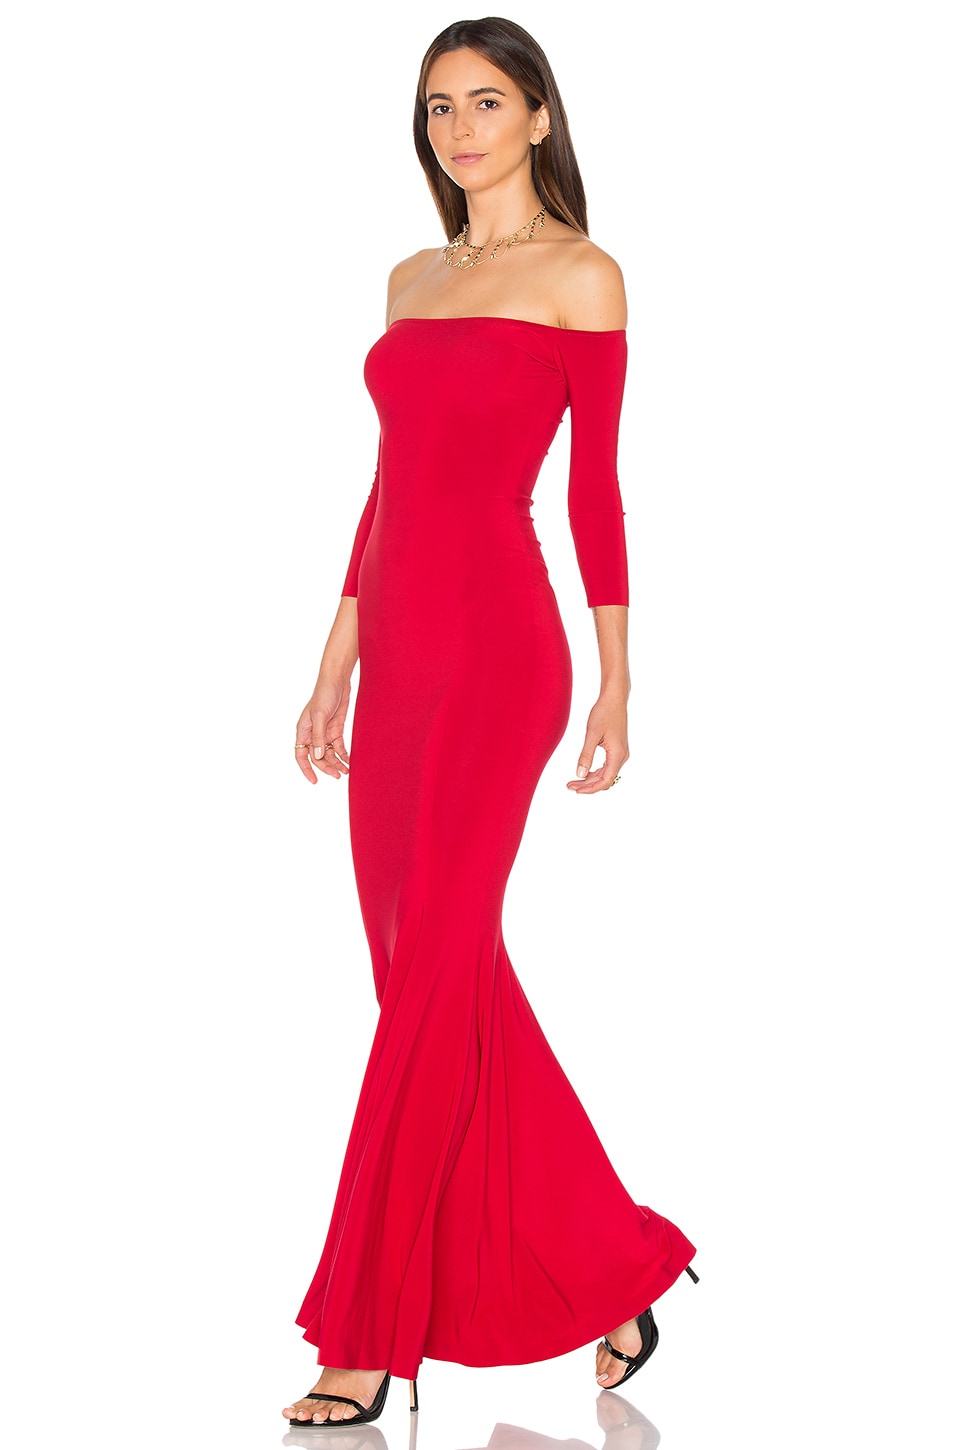 Norma Kamali Off The Shoulder Fishtail Gown in Red | REVOLVE